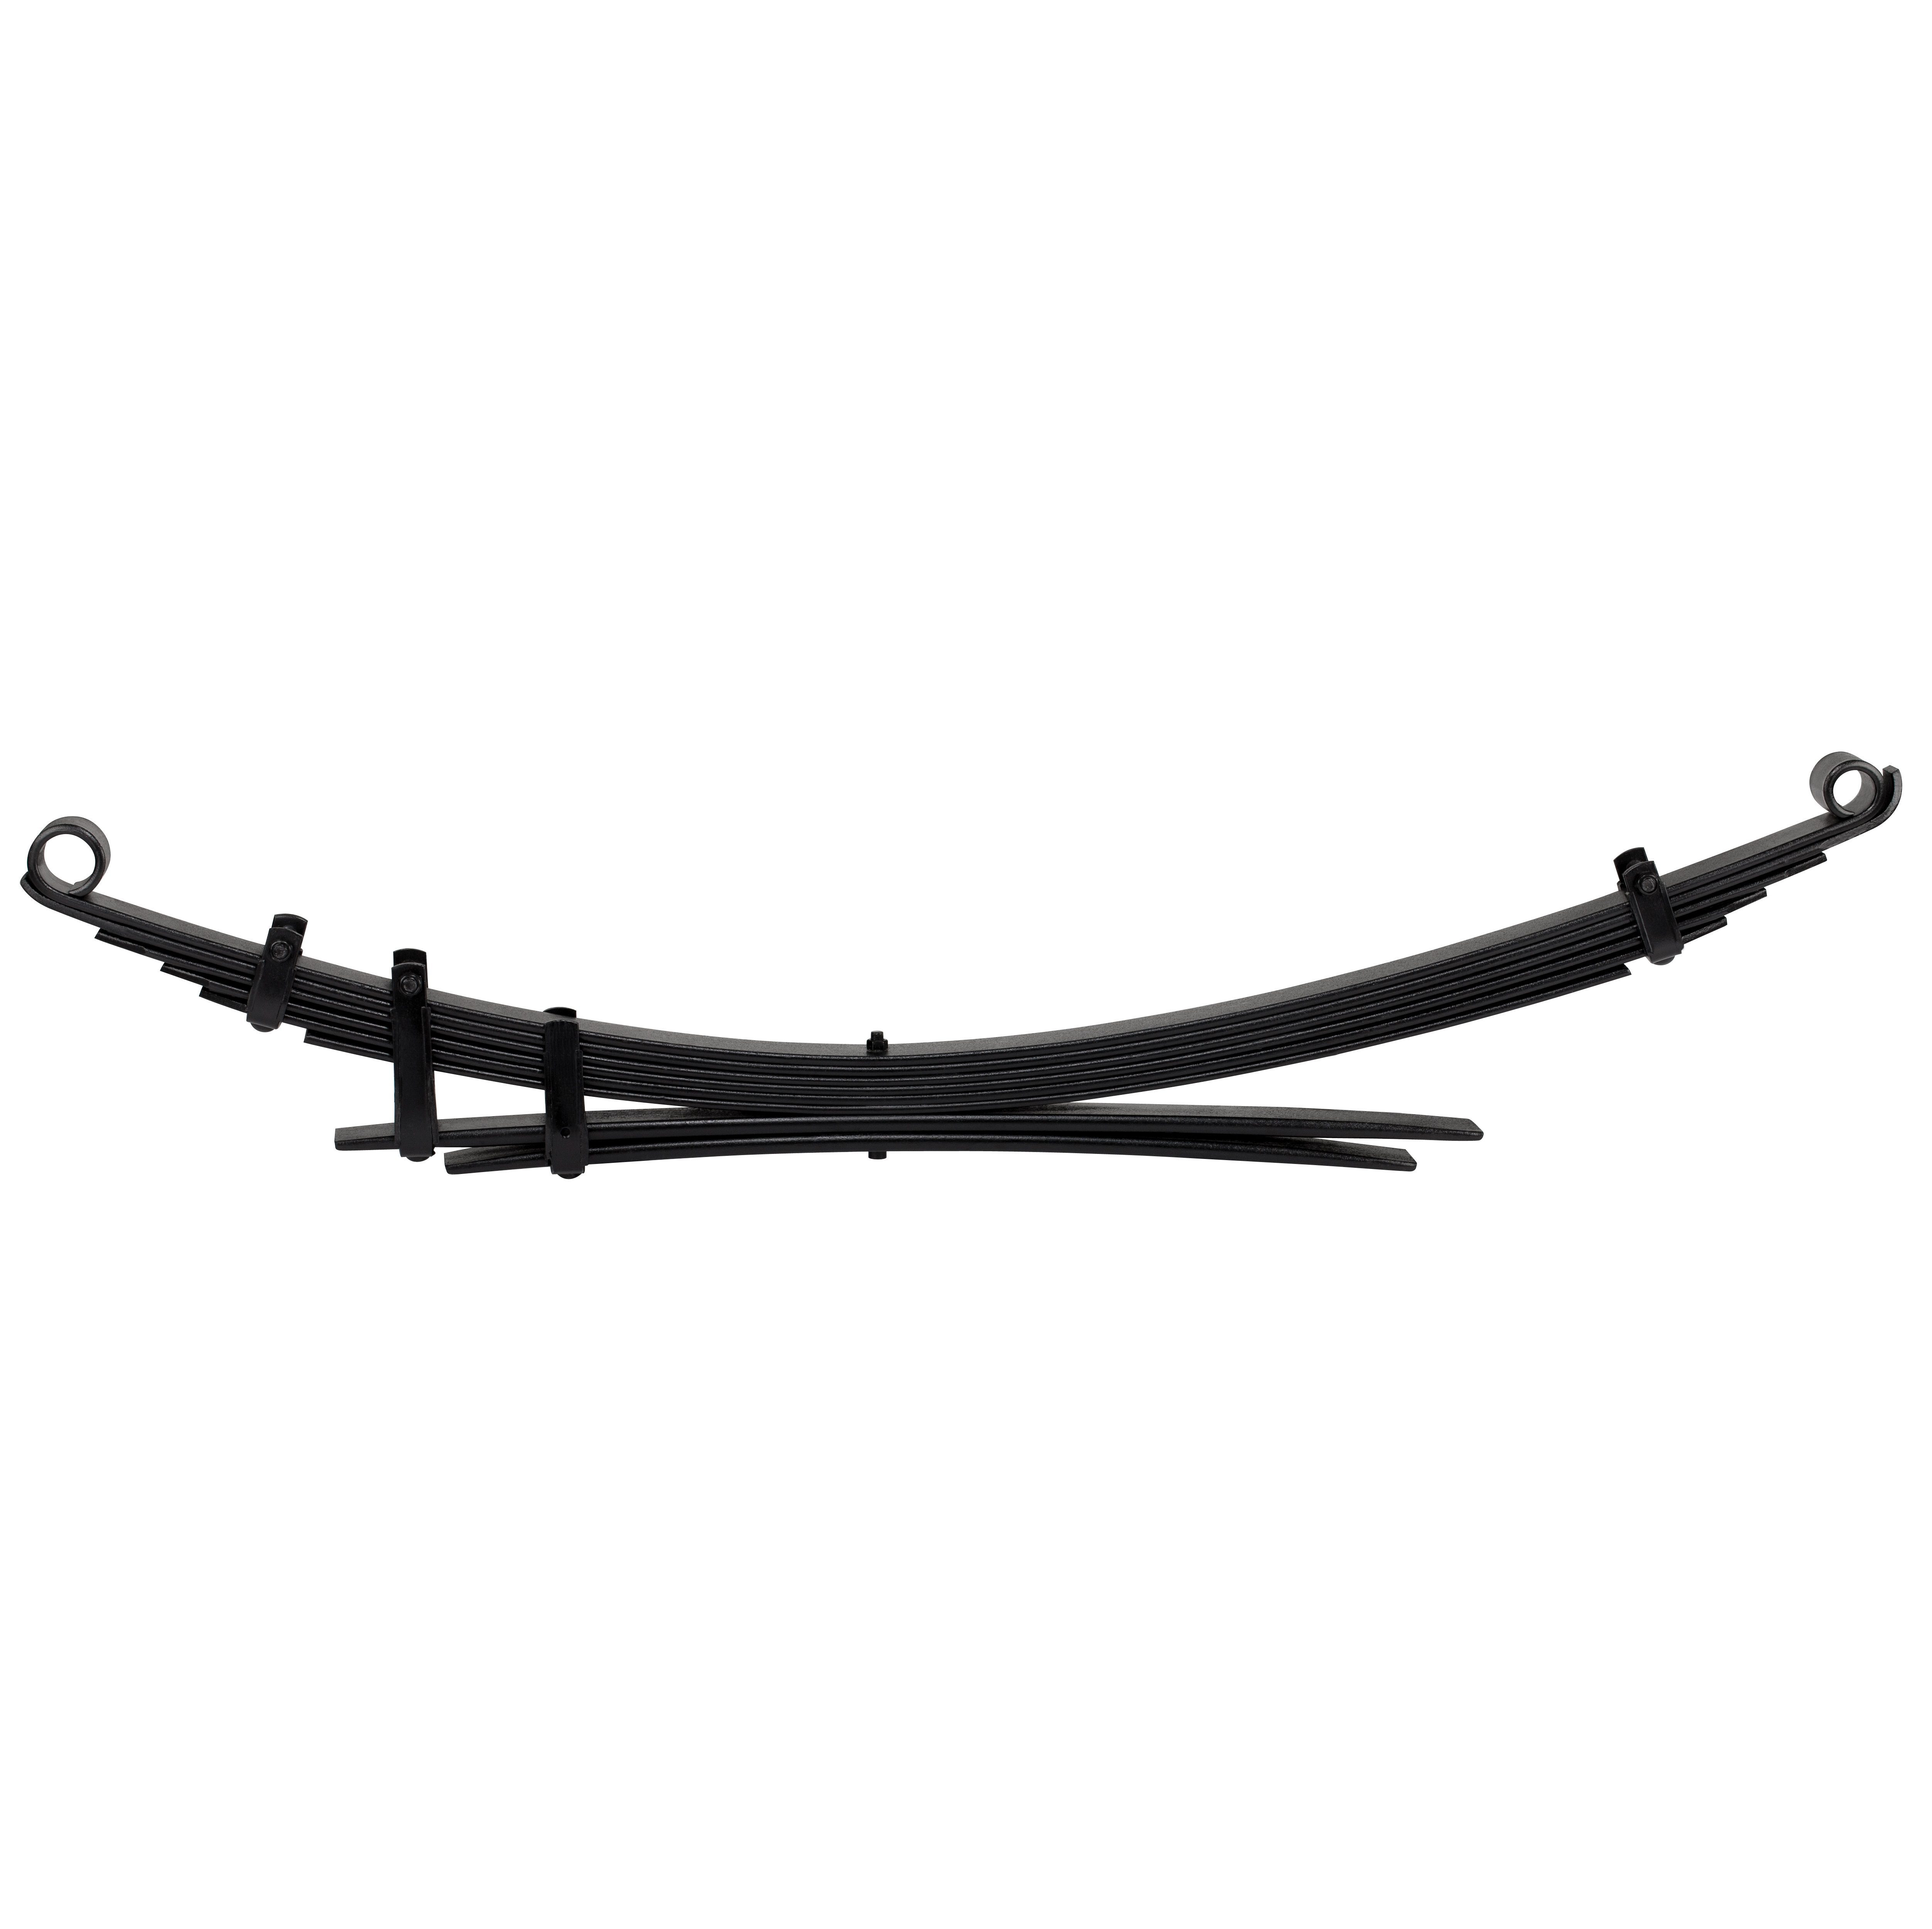 LC79 double cab Super Heavy REAR LEAF SPRING